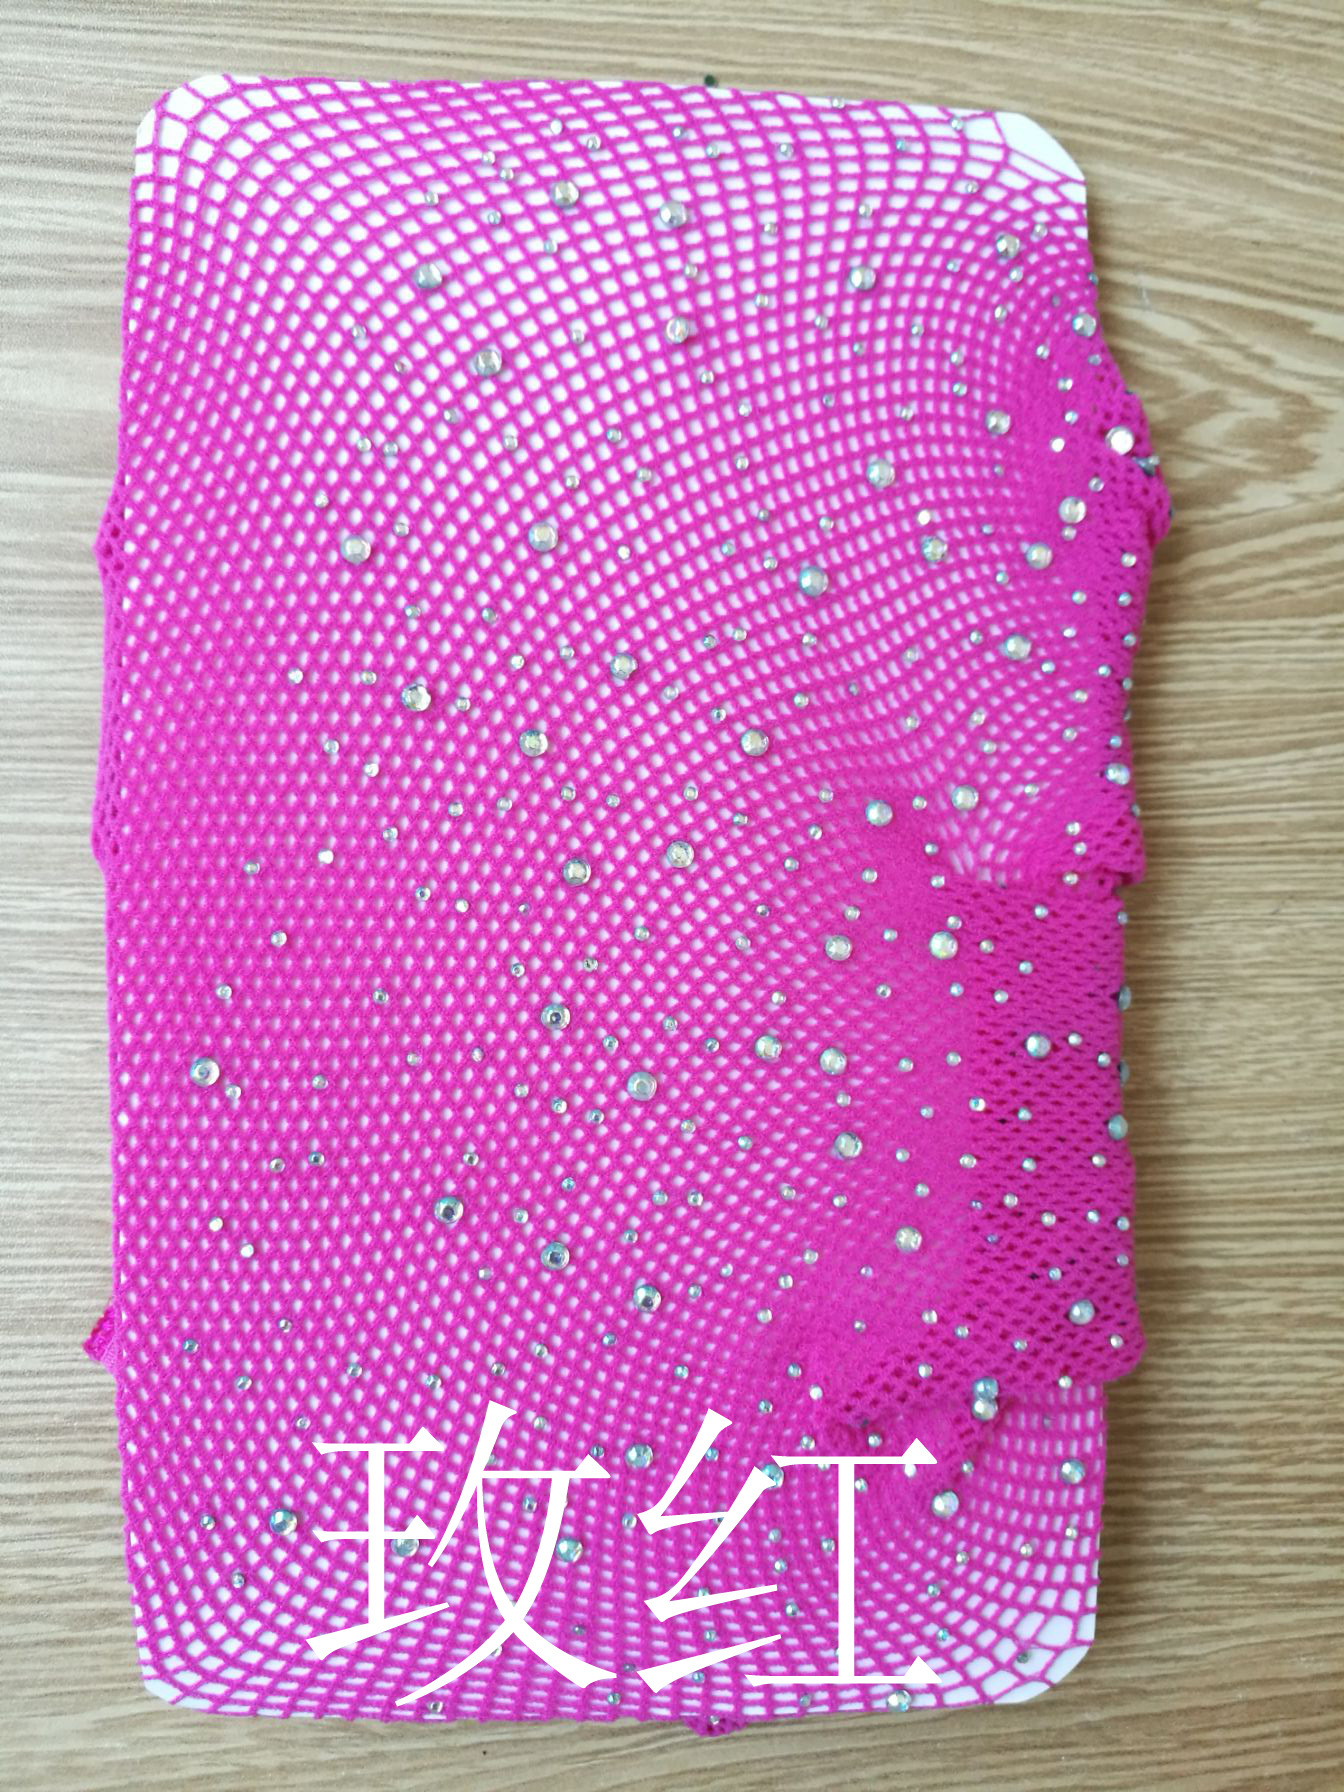 Yue Die Hot Sexy Stockings Hot Drilling Fishnet Pantyhose Starry Sky Colorful Crystals Base Pantyhose Mesh Stockings W28